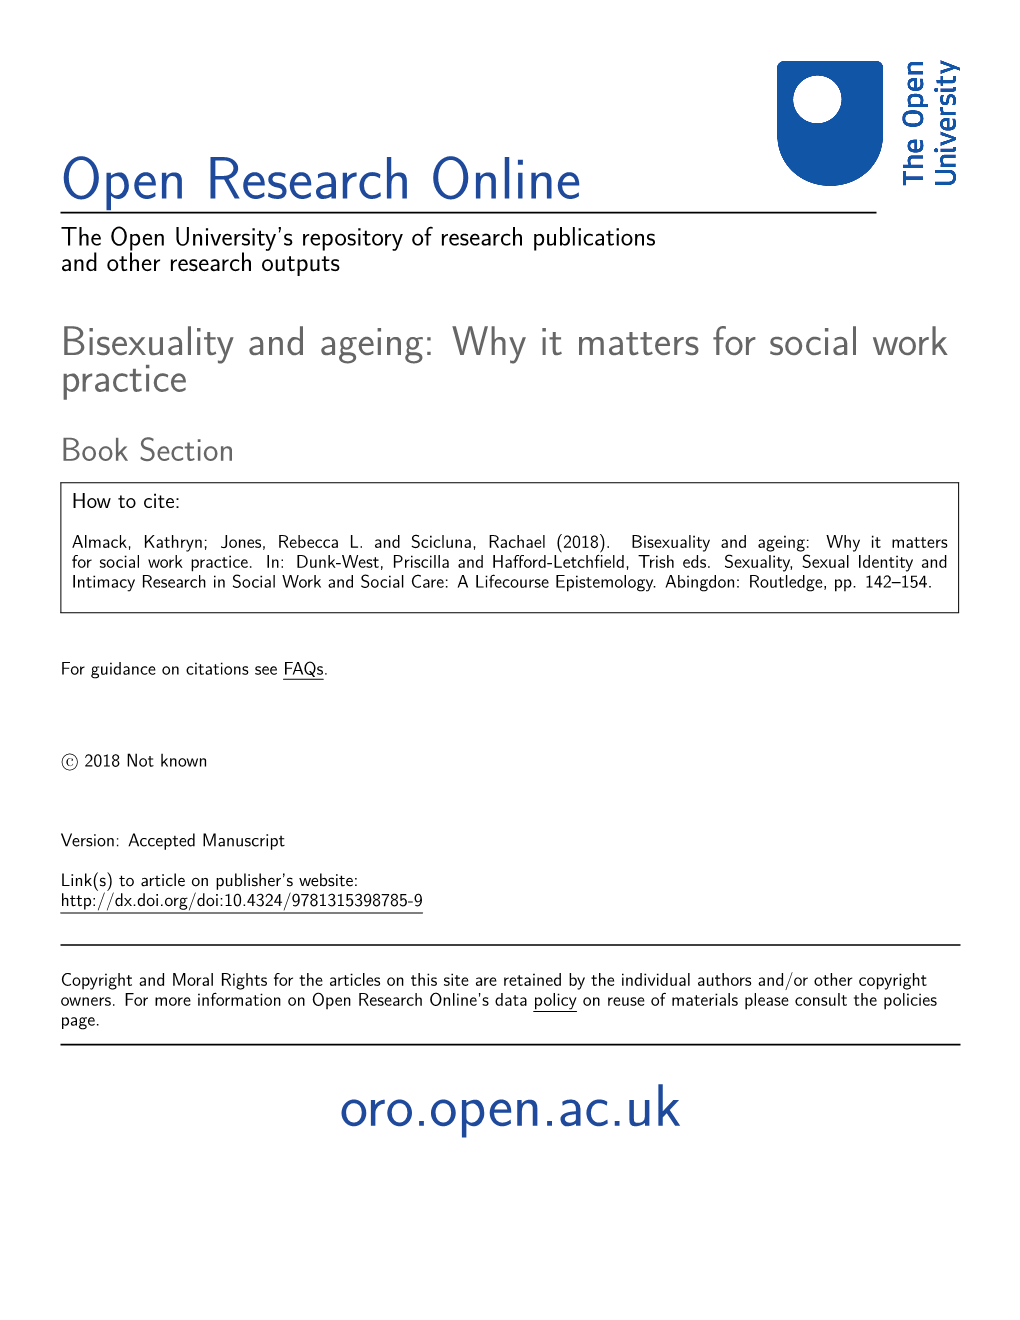 Bisexuality and Ageing: Why It Matters for Social Work Practice